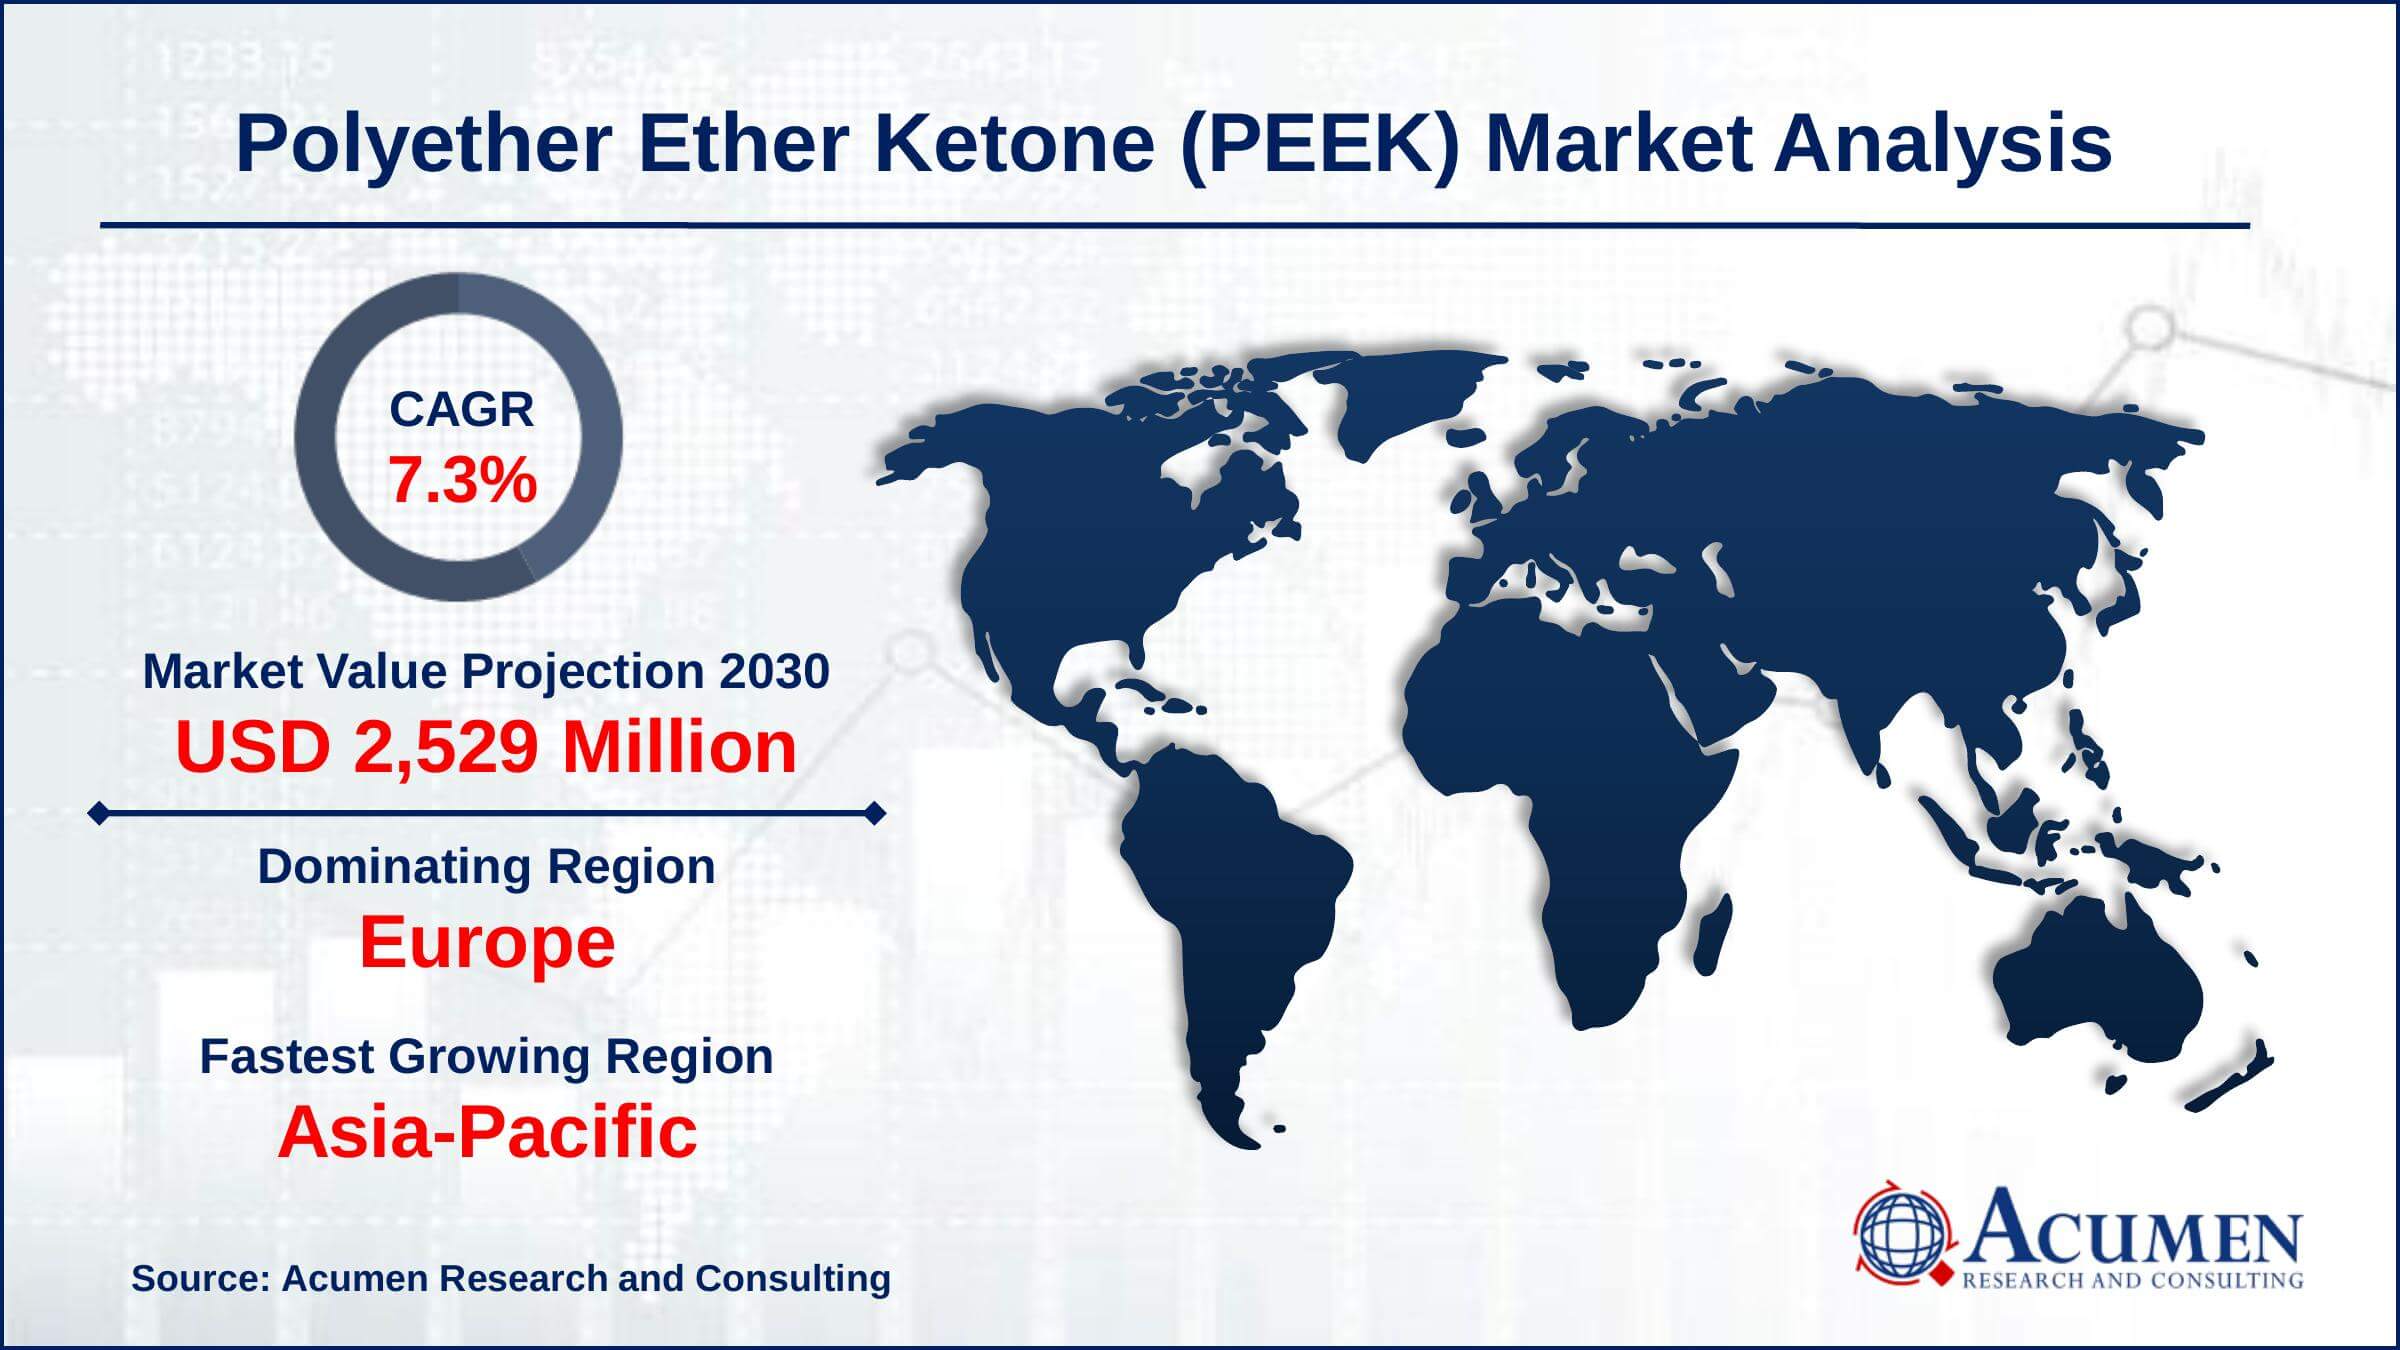 Asia-Pacific PEEK market growth will observe fastest CAGR from 2022 to 2030